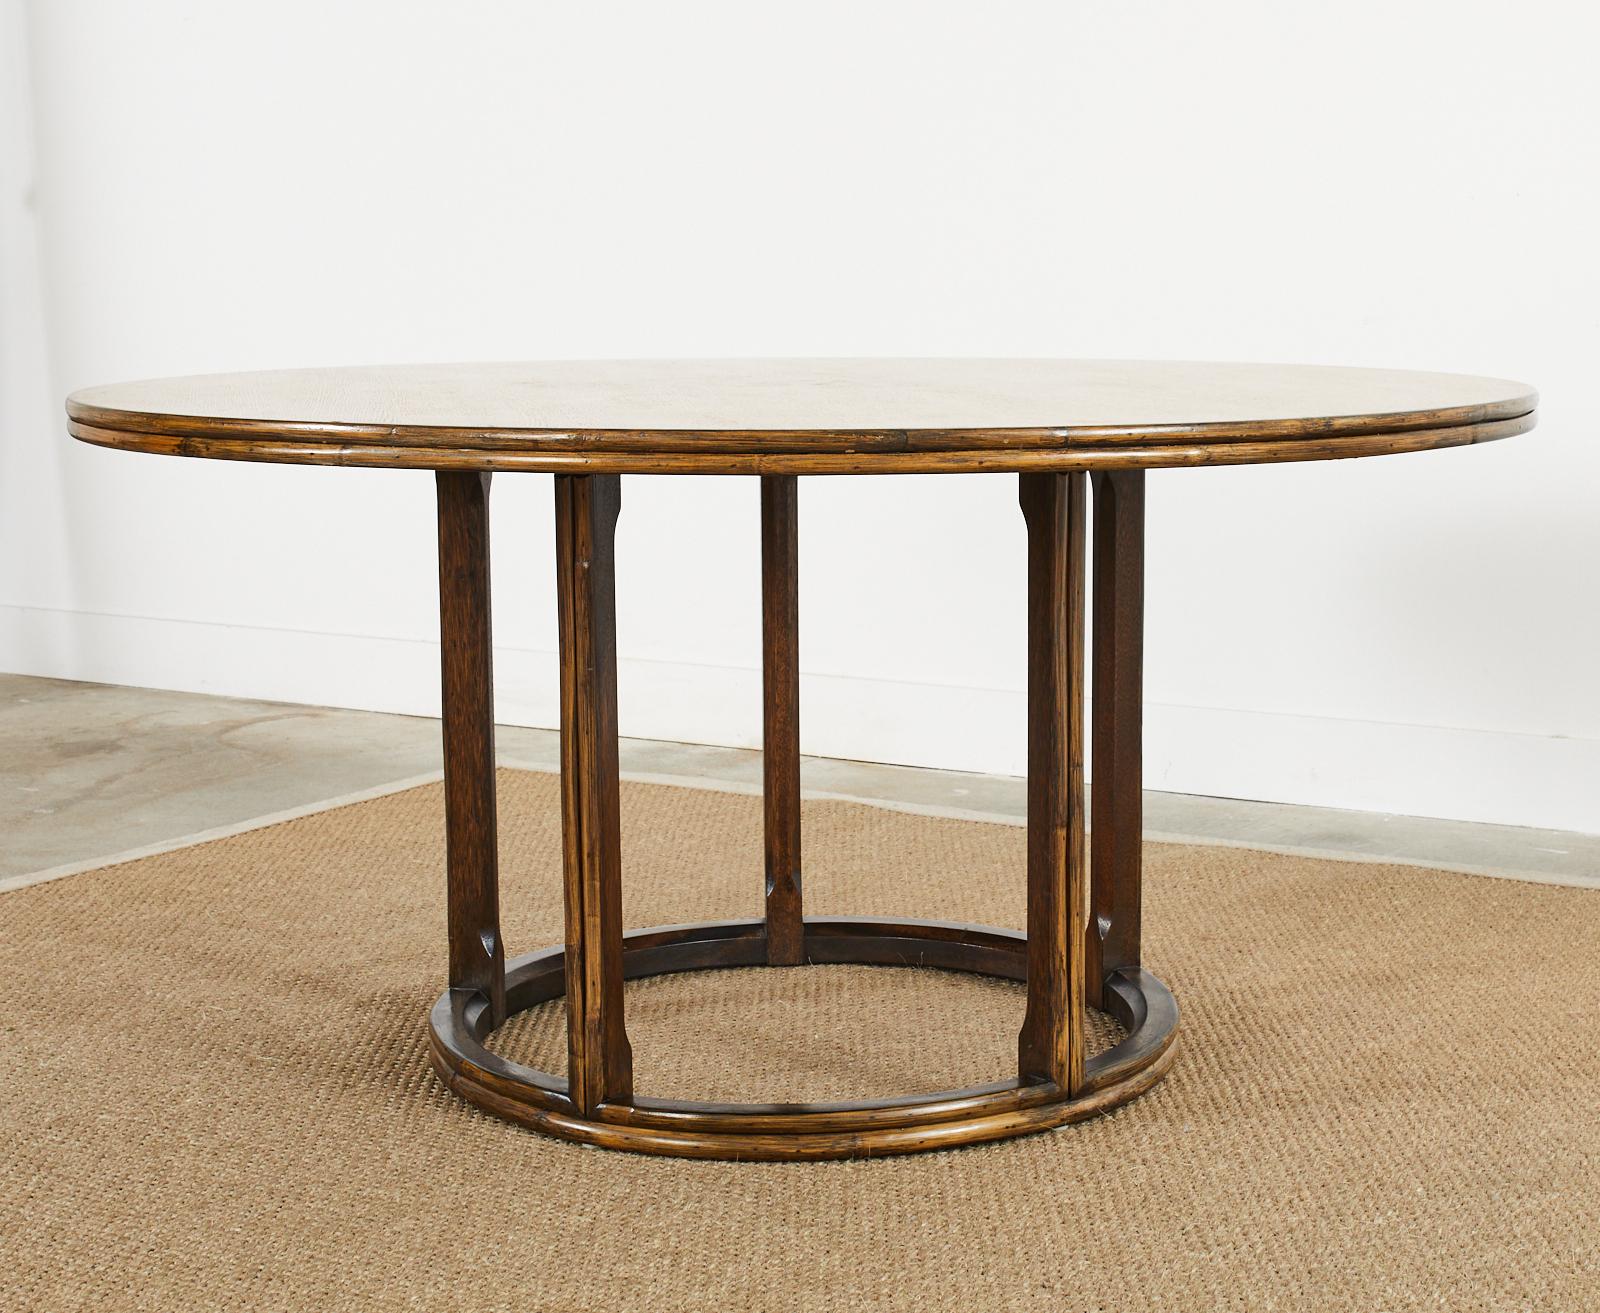 McGuire Organic Modern Round Rattan Oak Dining Table In Good Condition For Sale In Rio Vista, CA